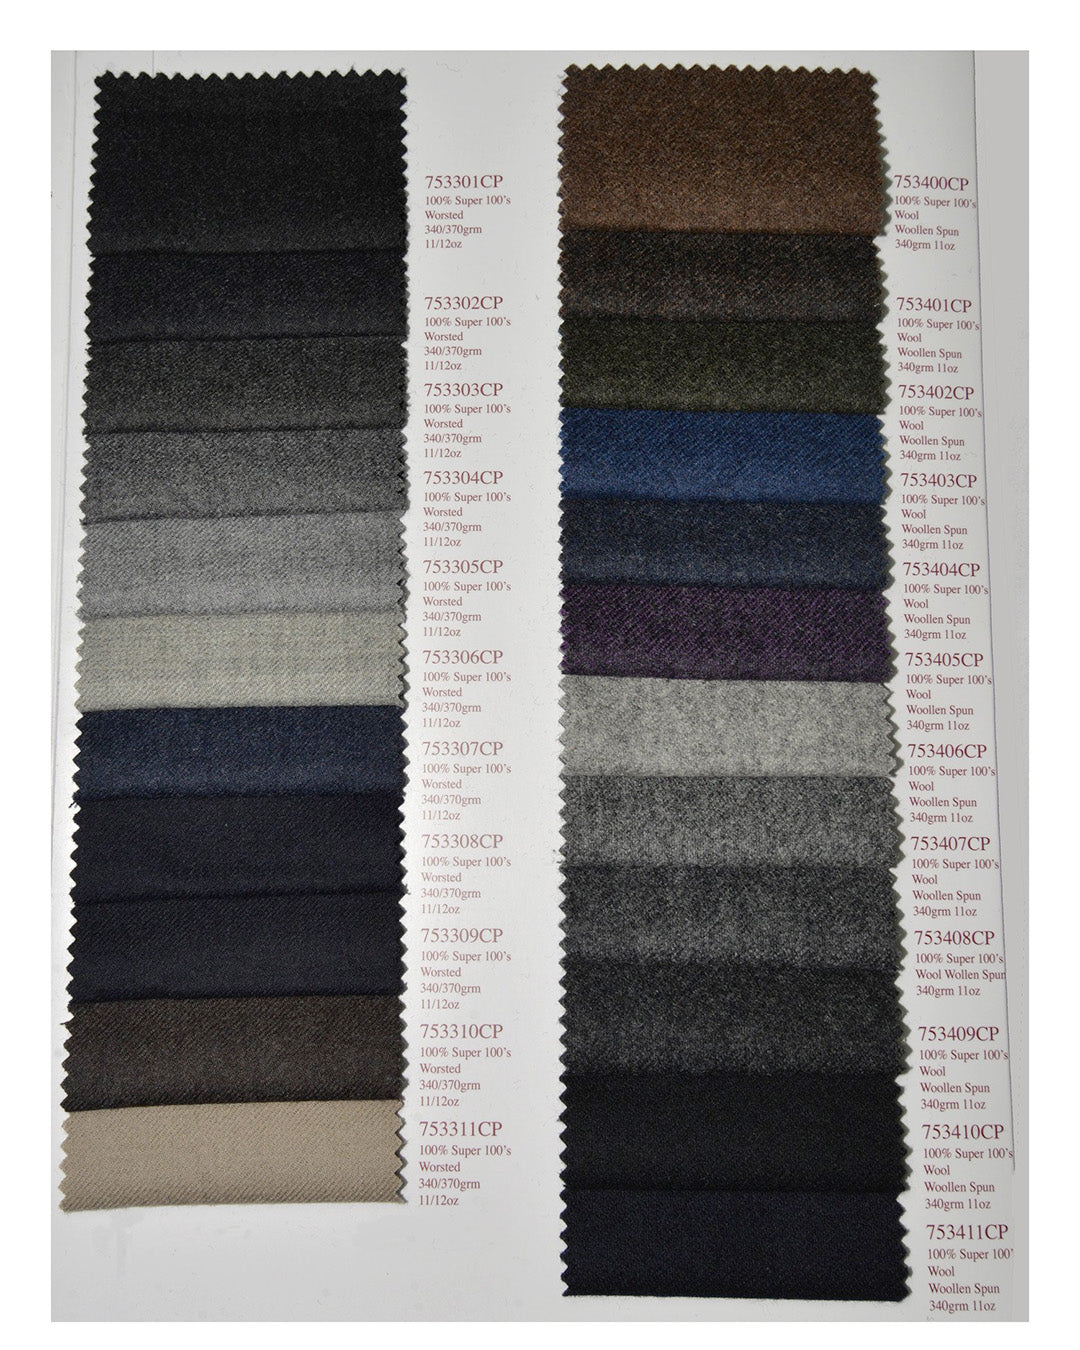 Holland Sherry Classic Worsted Flannel Darkgrey